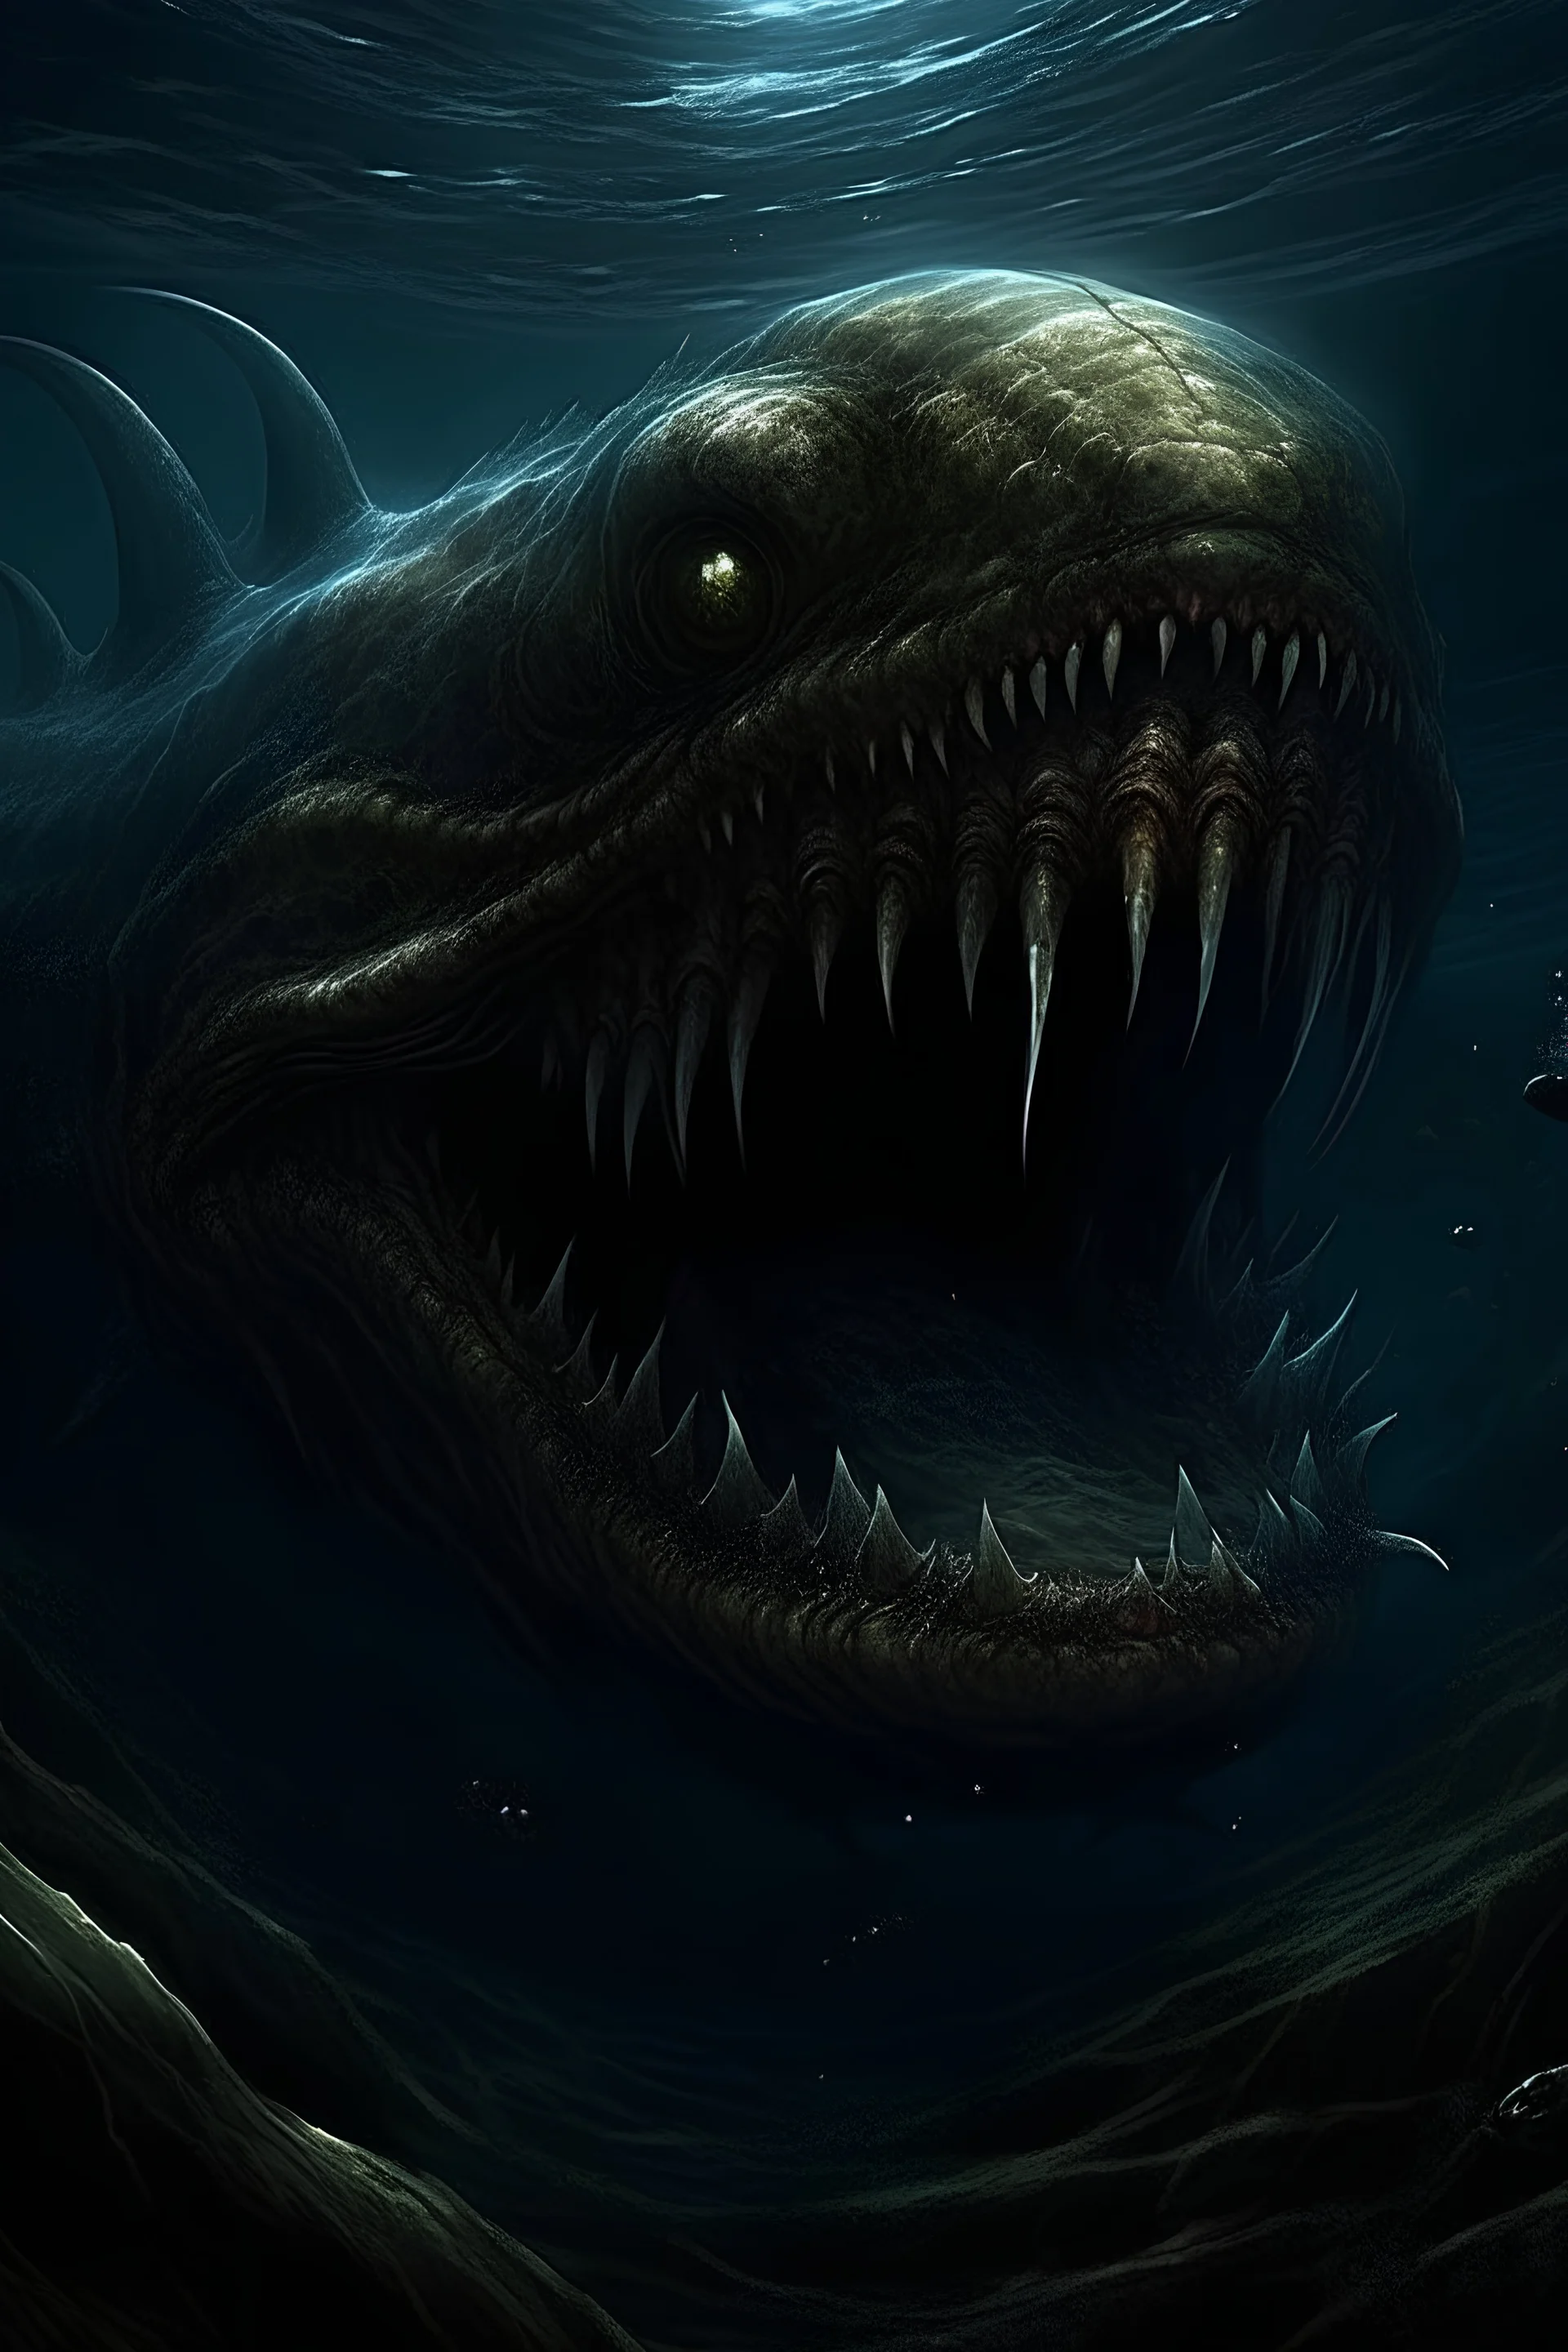 A (((disturbingly massive sea monster))) lurking in the (((ocean depths))) with its (((vast body looming around a (black hole where its eye should be))))) evoking a sense of foreboding and the unknown with its (lot of Sharpen Teeth)